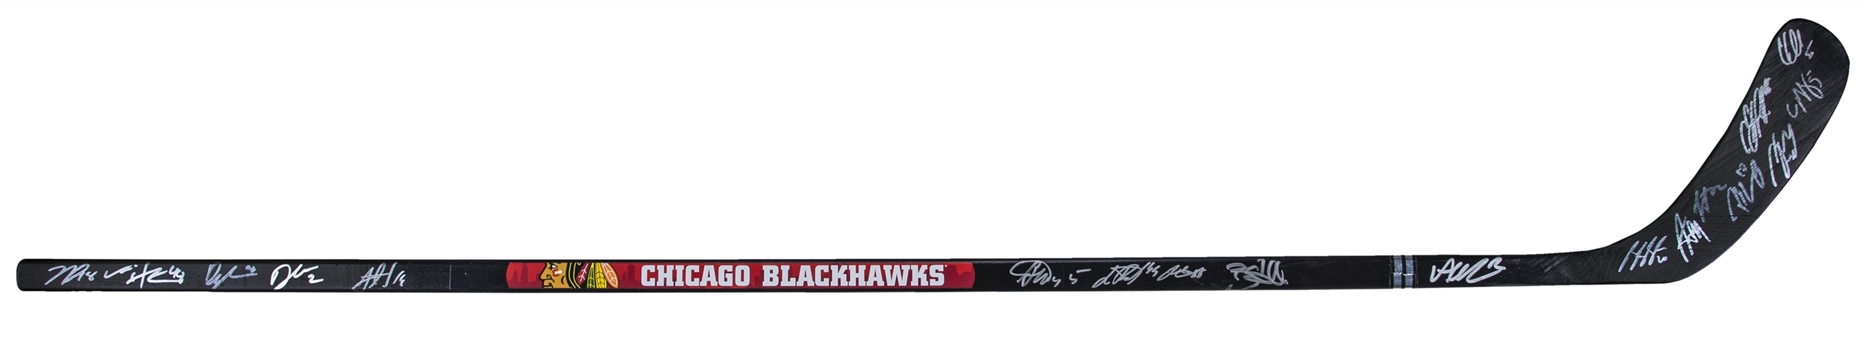 2017-18 Chicago Blackhawks Team Signed Hockey Stick With 18 Signatures Including Patrick Kane, Duncan Keith, Jonathan Toews, Brent Seabrook and Corey Crawford (JSA)